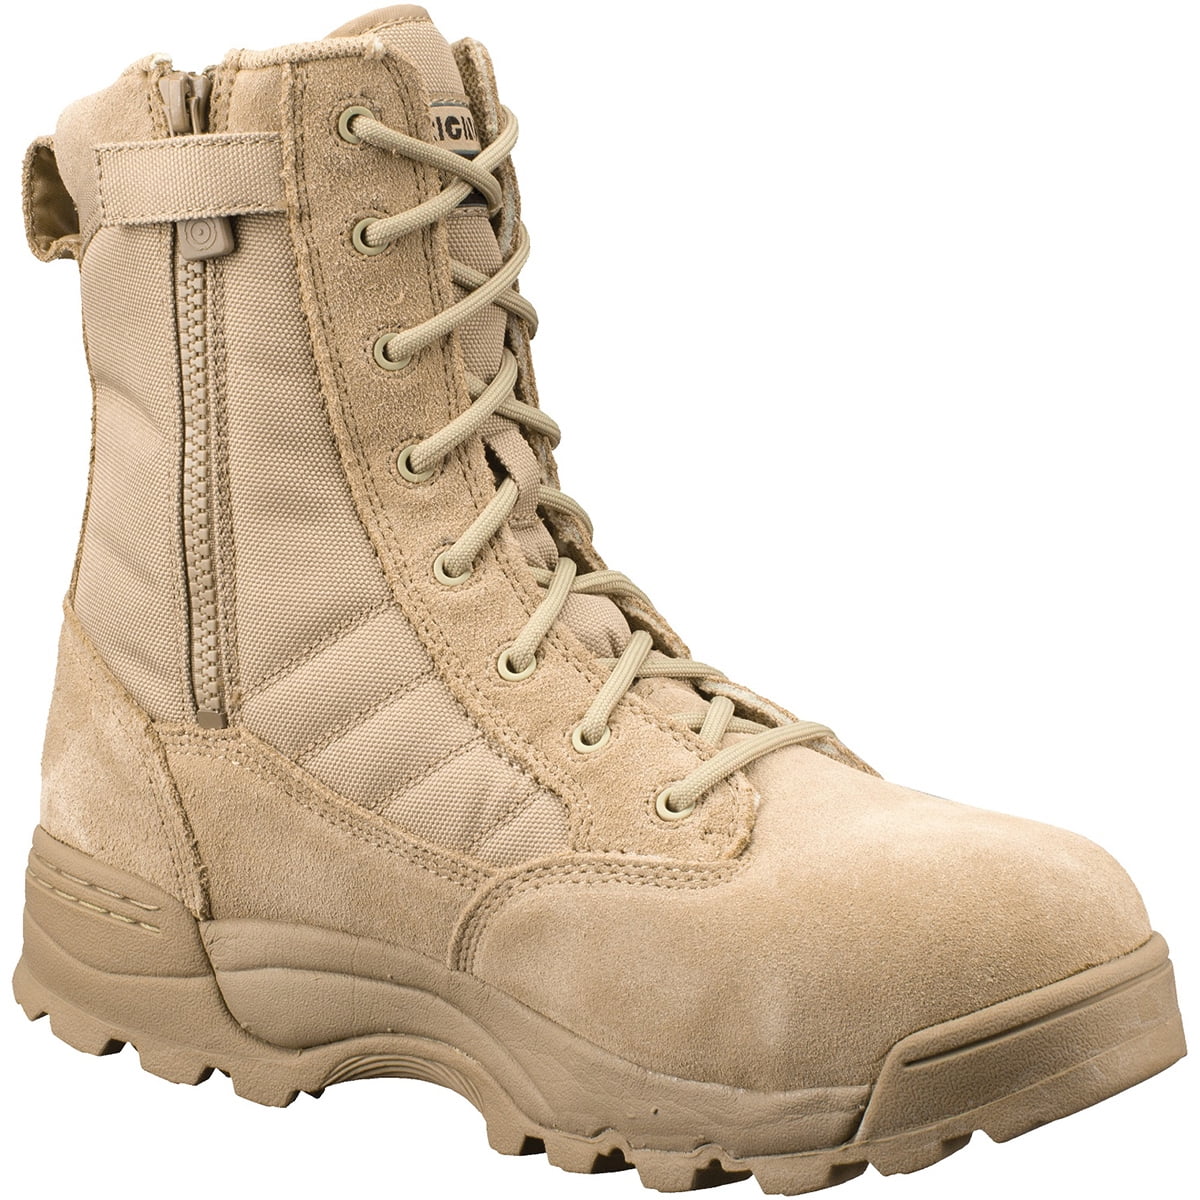 Super explosion Men’s Non-Slip Military Tactical Boots Combat Desert Duty Work Shoes with Side Zipper